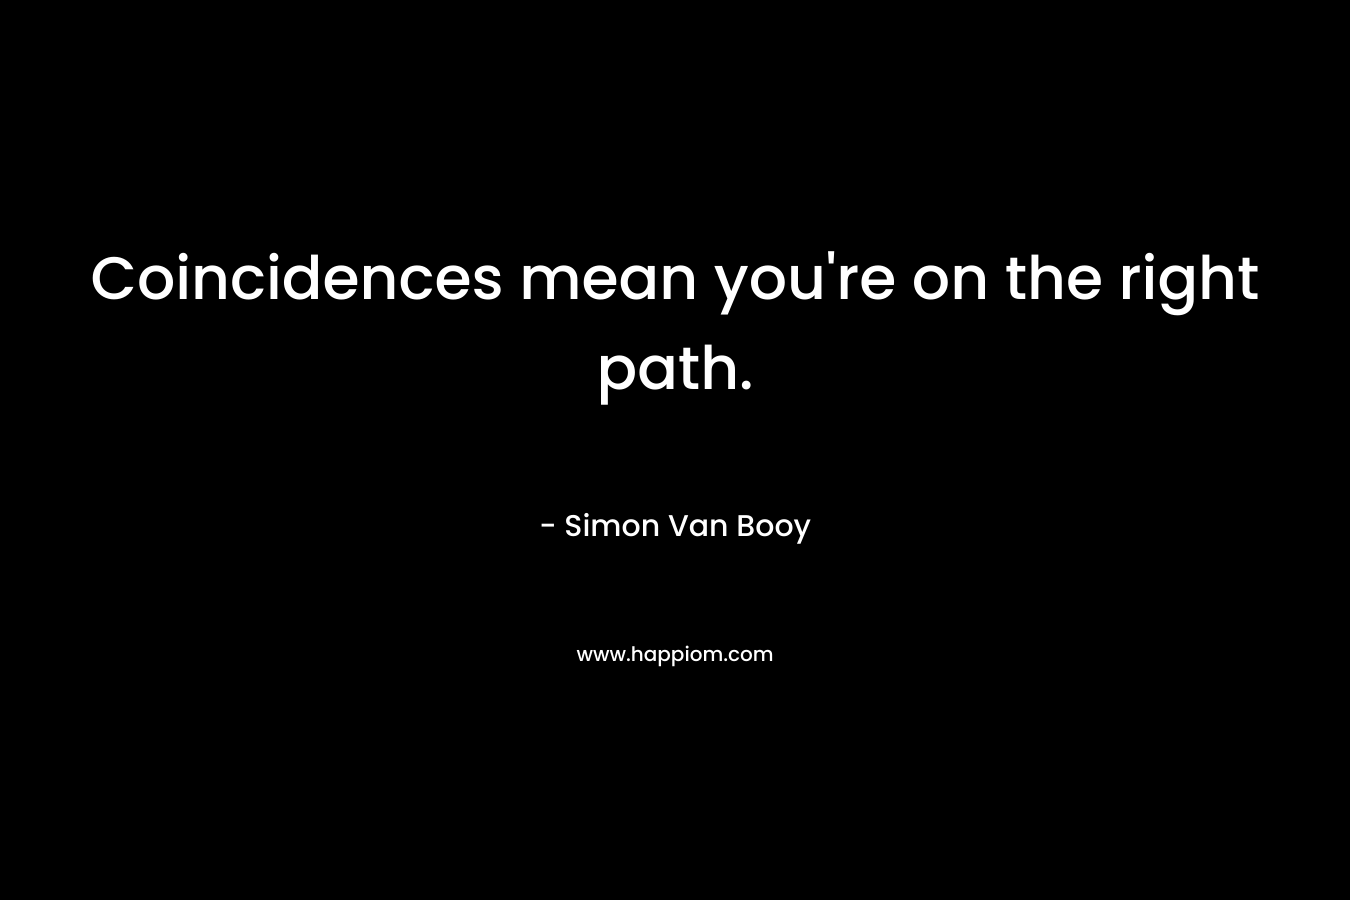 Coincidences mean you're on the right path.